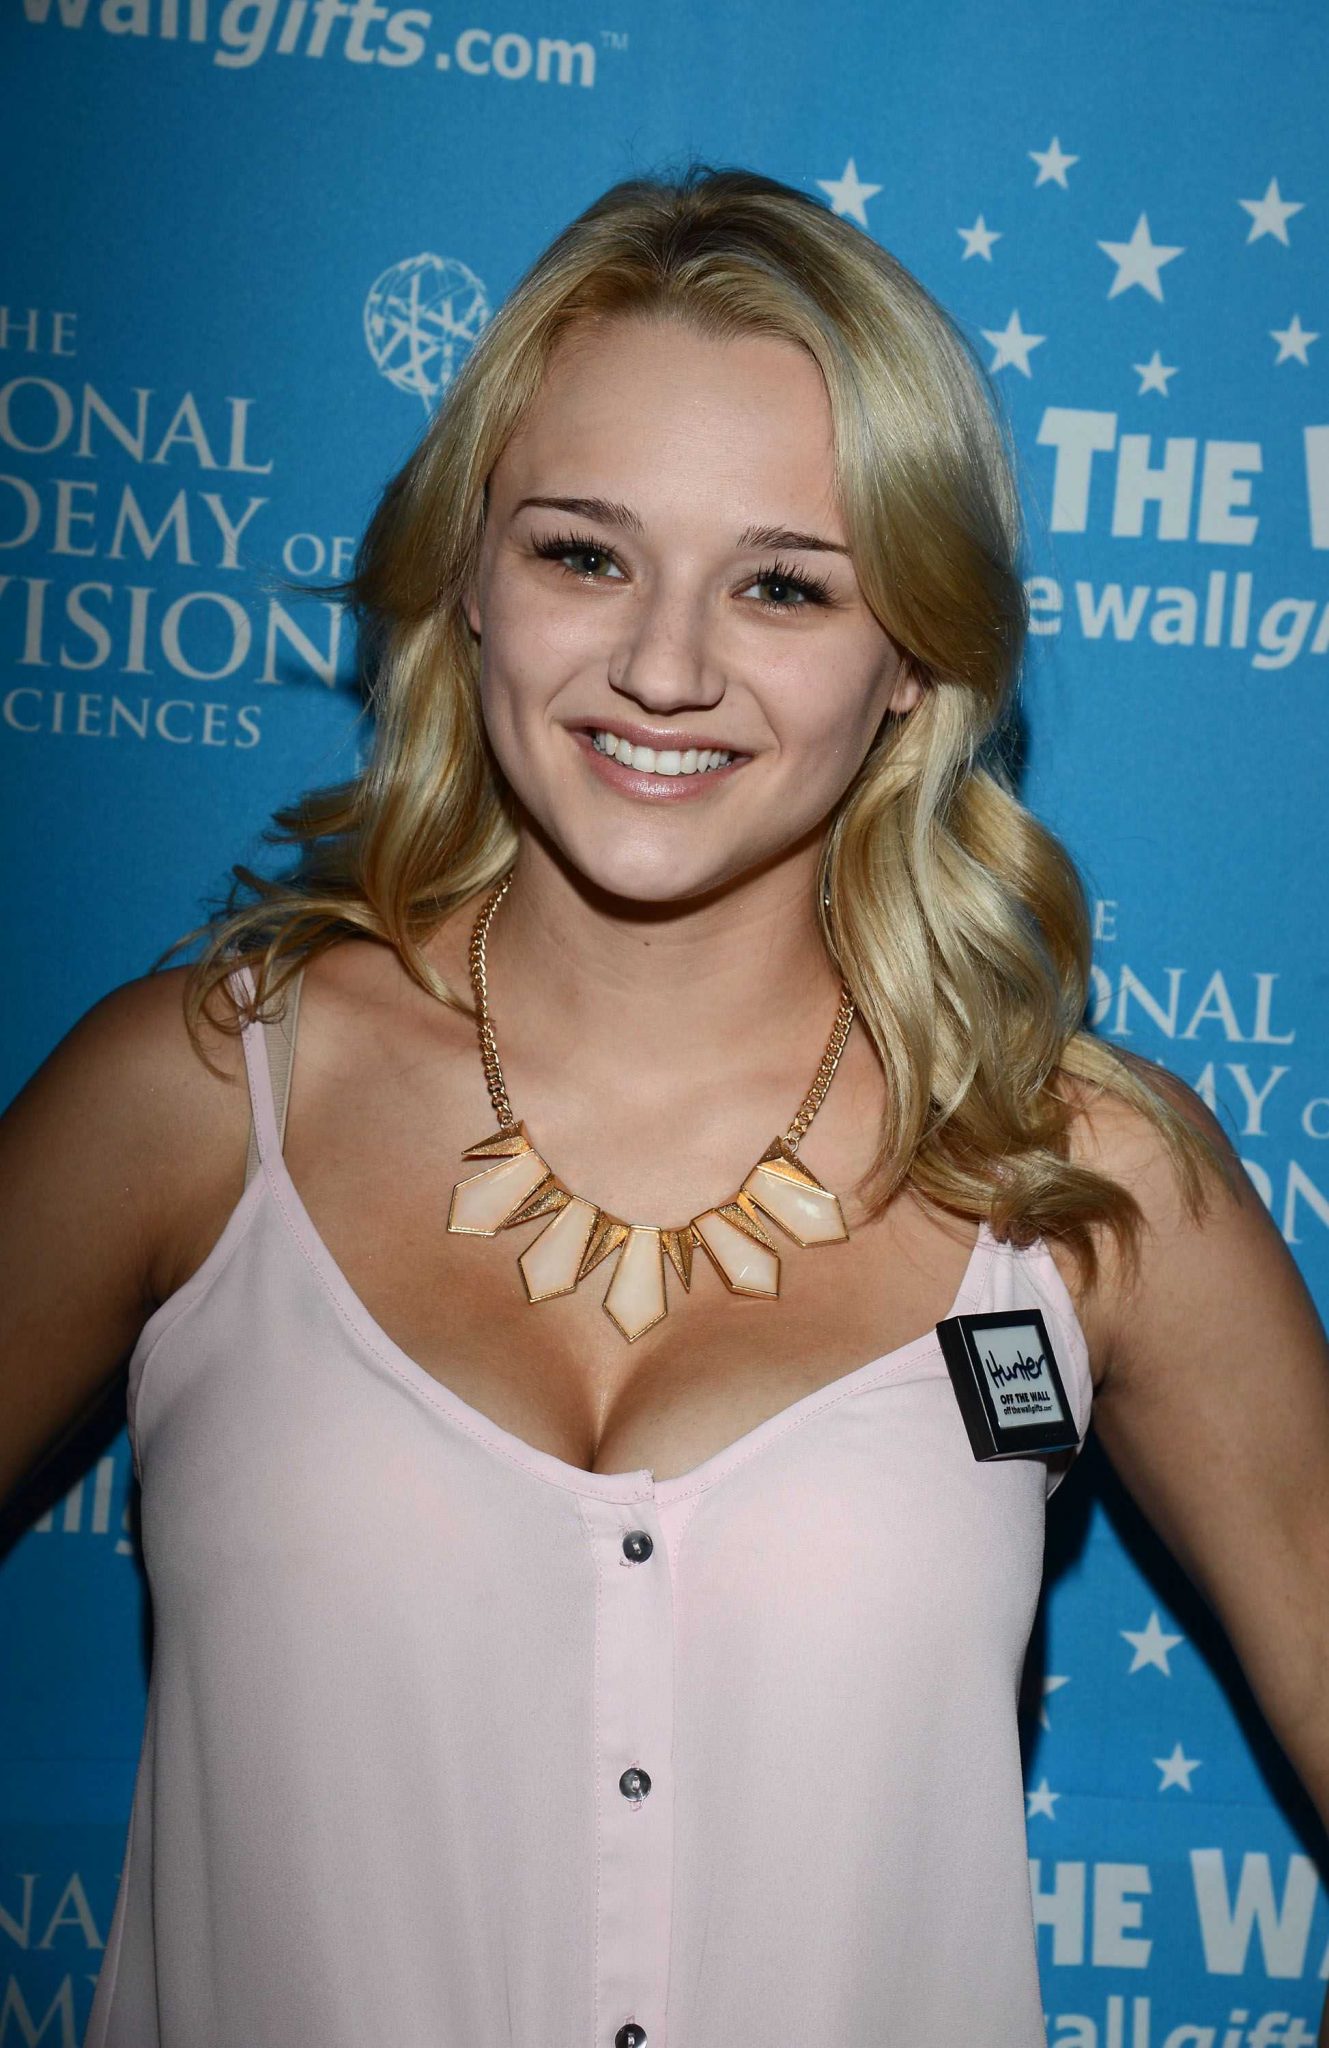 51 Hunter King Nude Pictures Display Her As A Skilled Performer 66